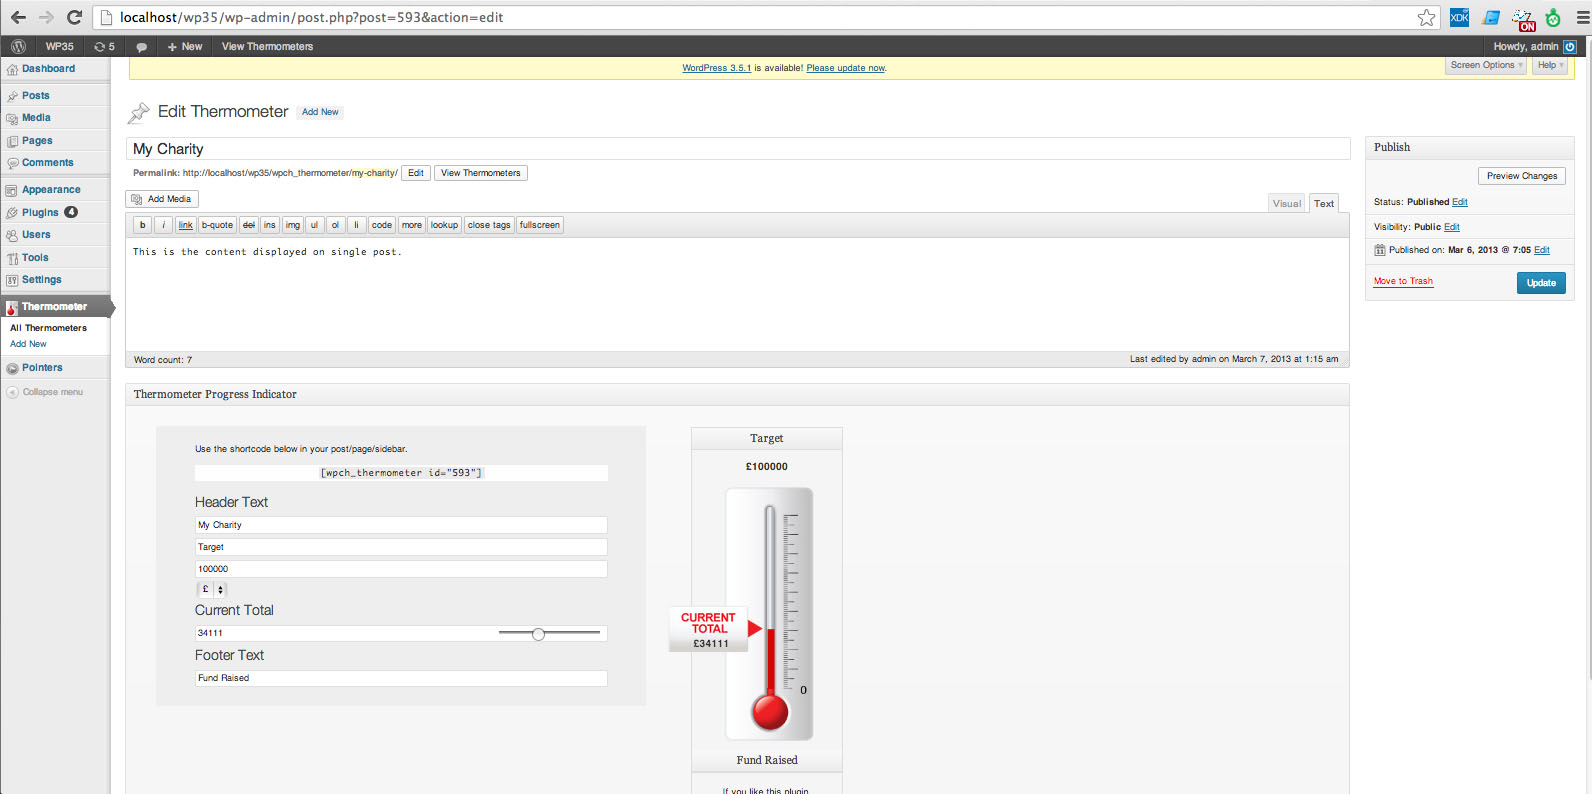 This is the screenshot for the admin of the charity-thermometer plugin.